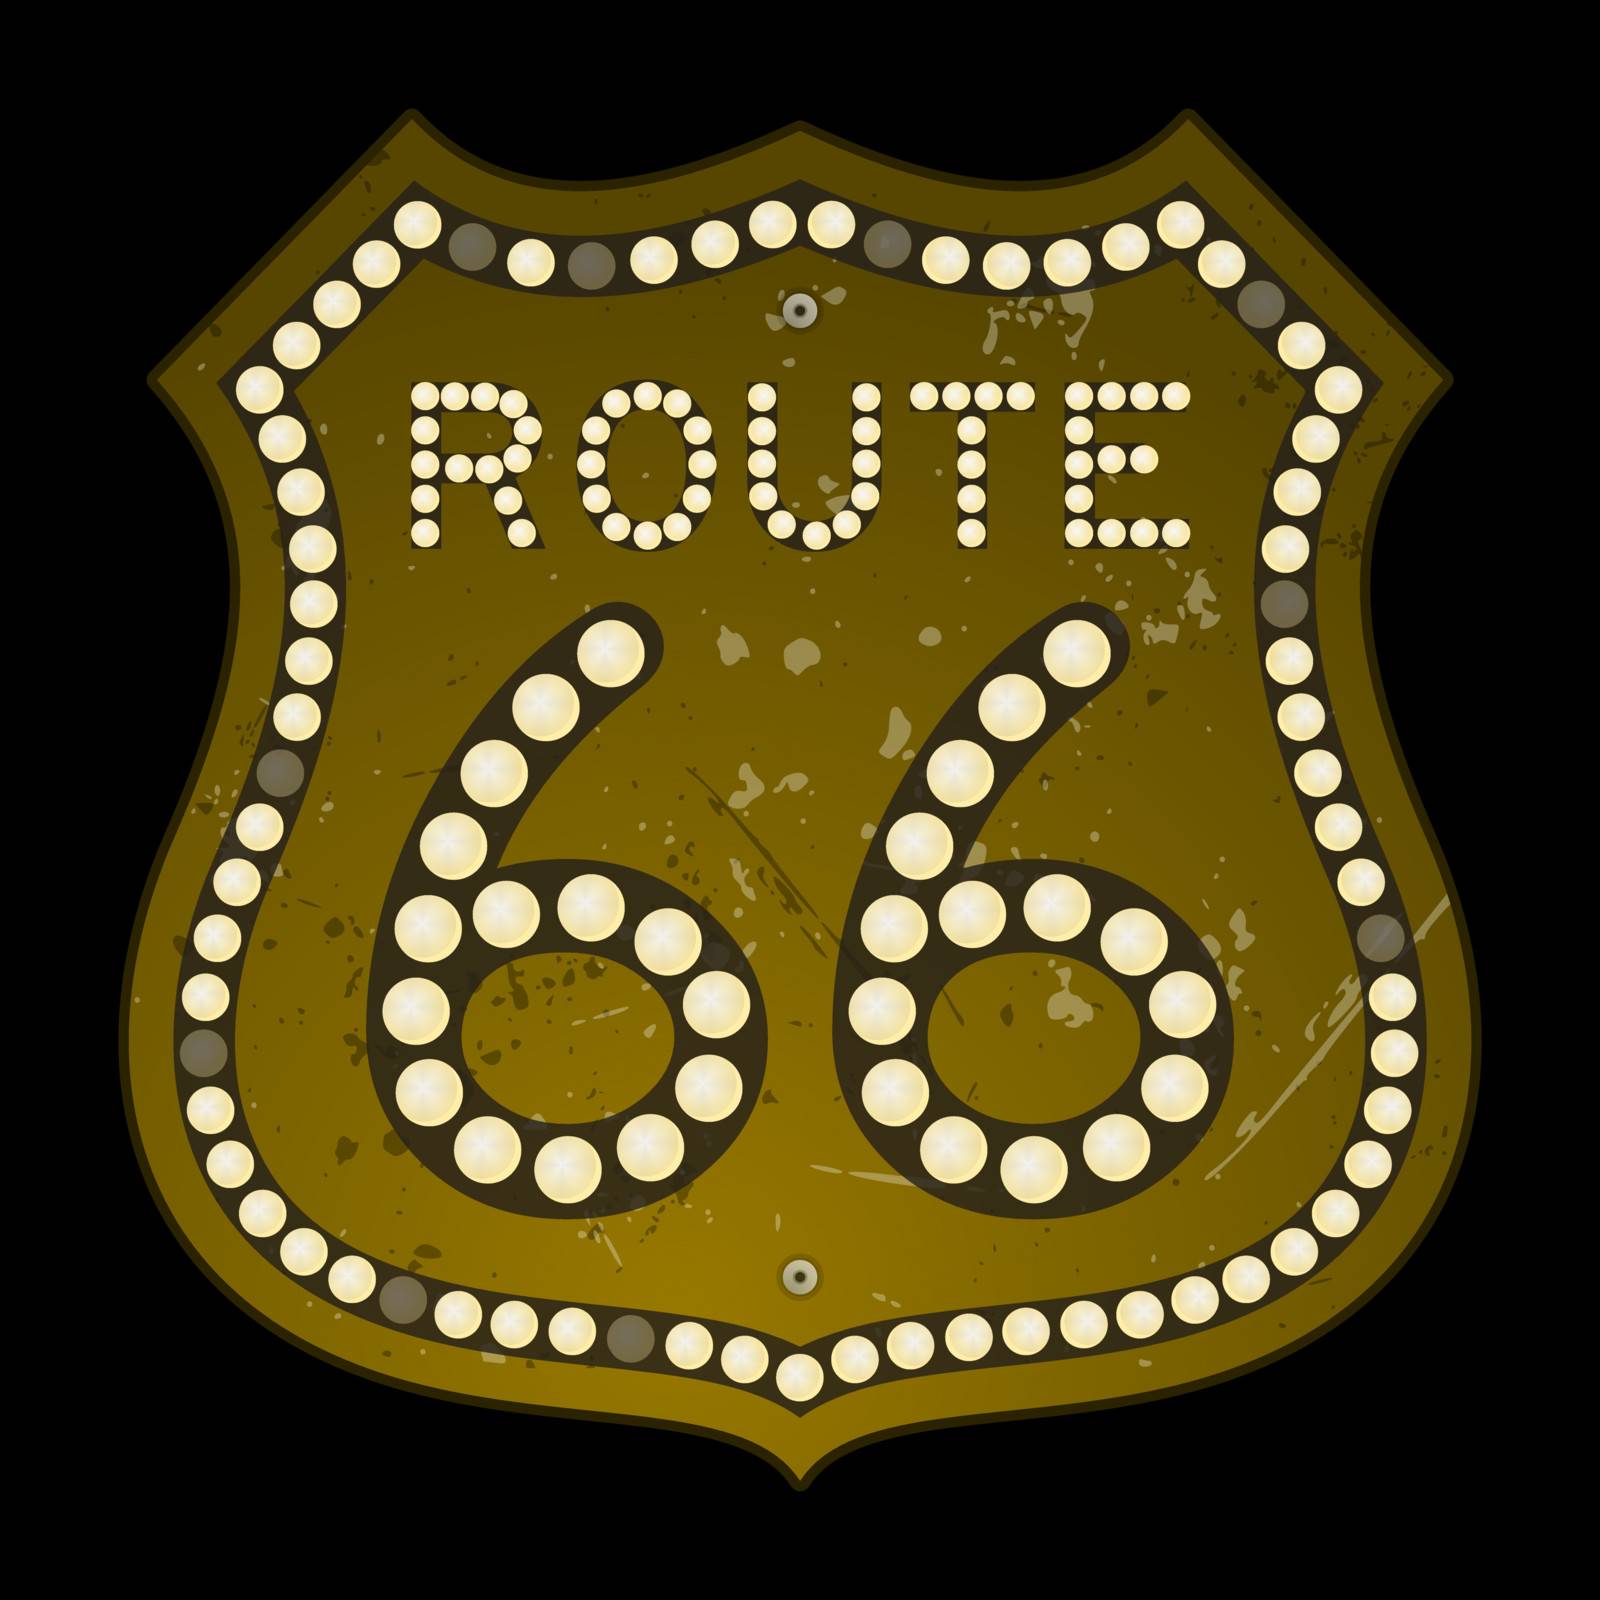 Illustration of historic roadsign with lights and numbers 66